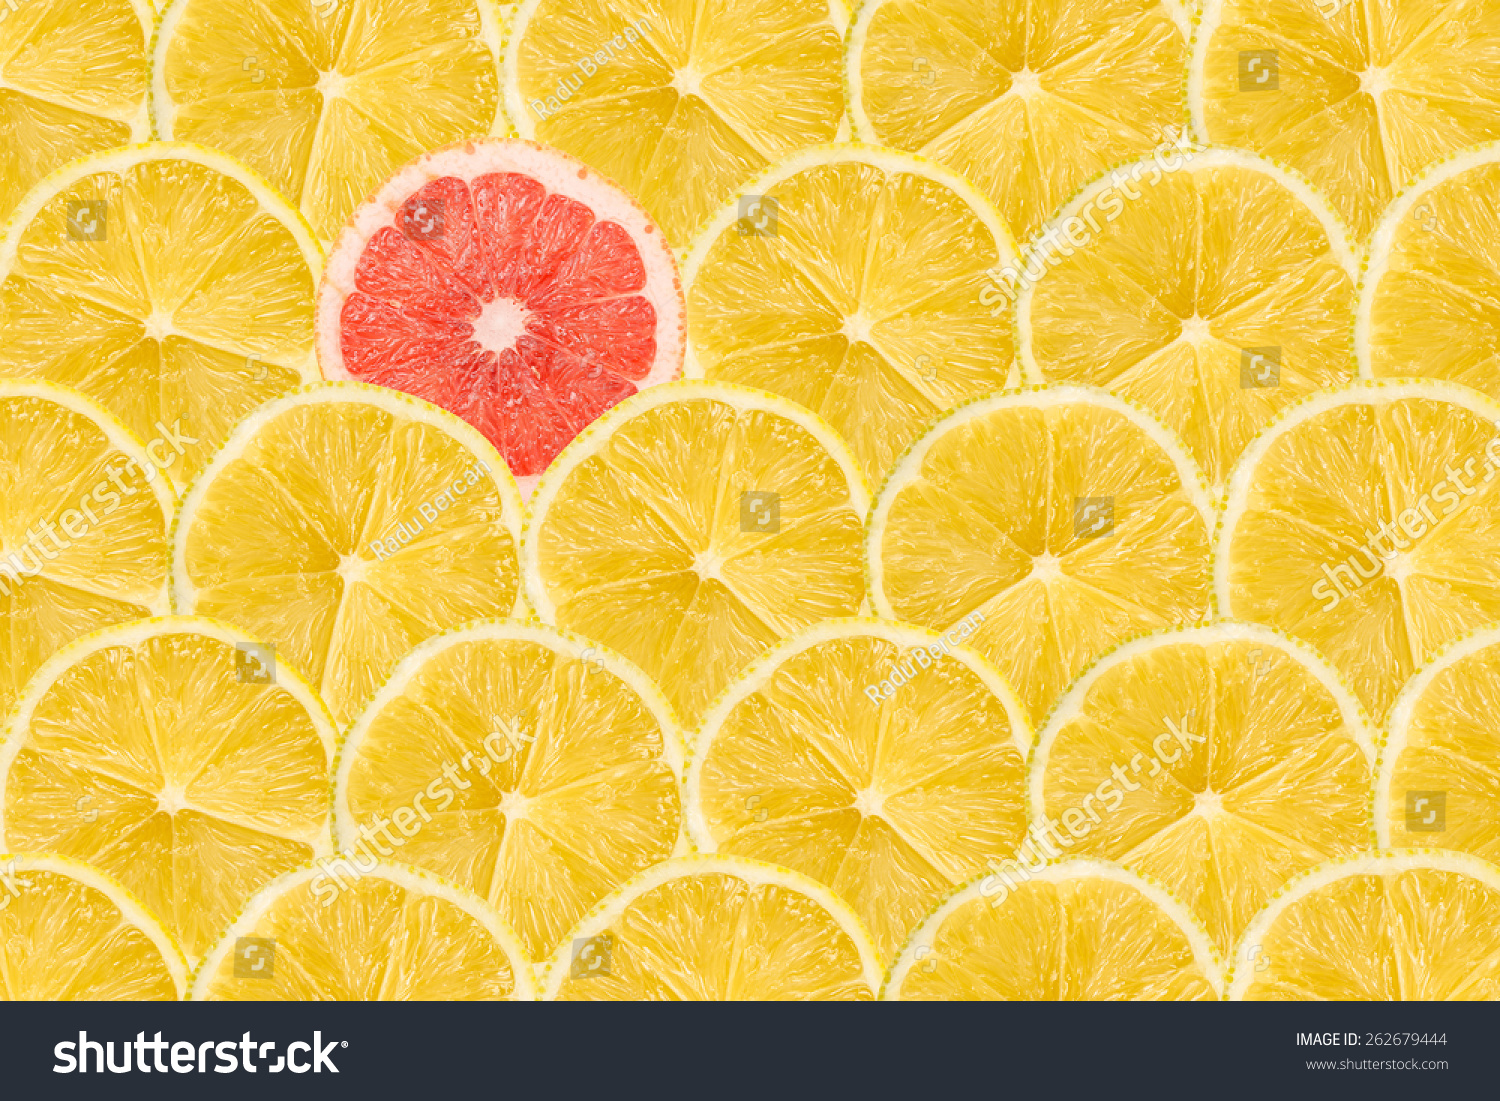 One Pink Grapefruit Slice Stand Out Of Yellow Lemon Slices #262679444